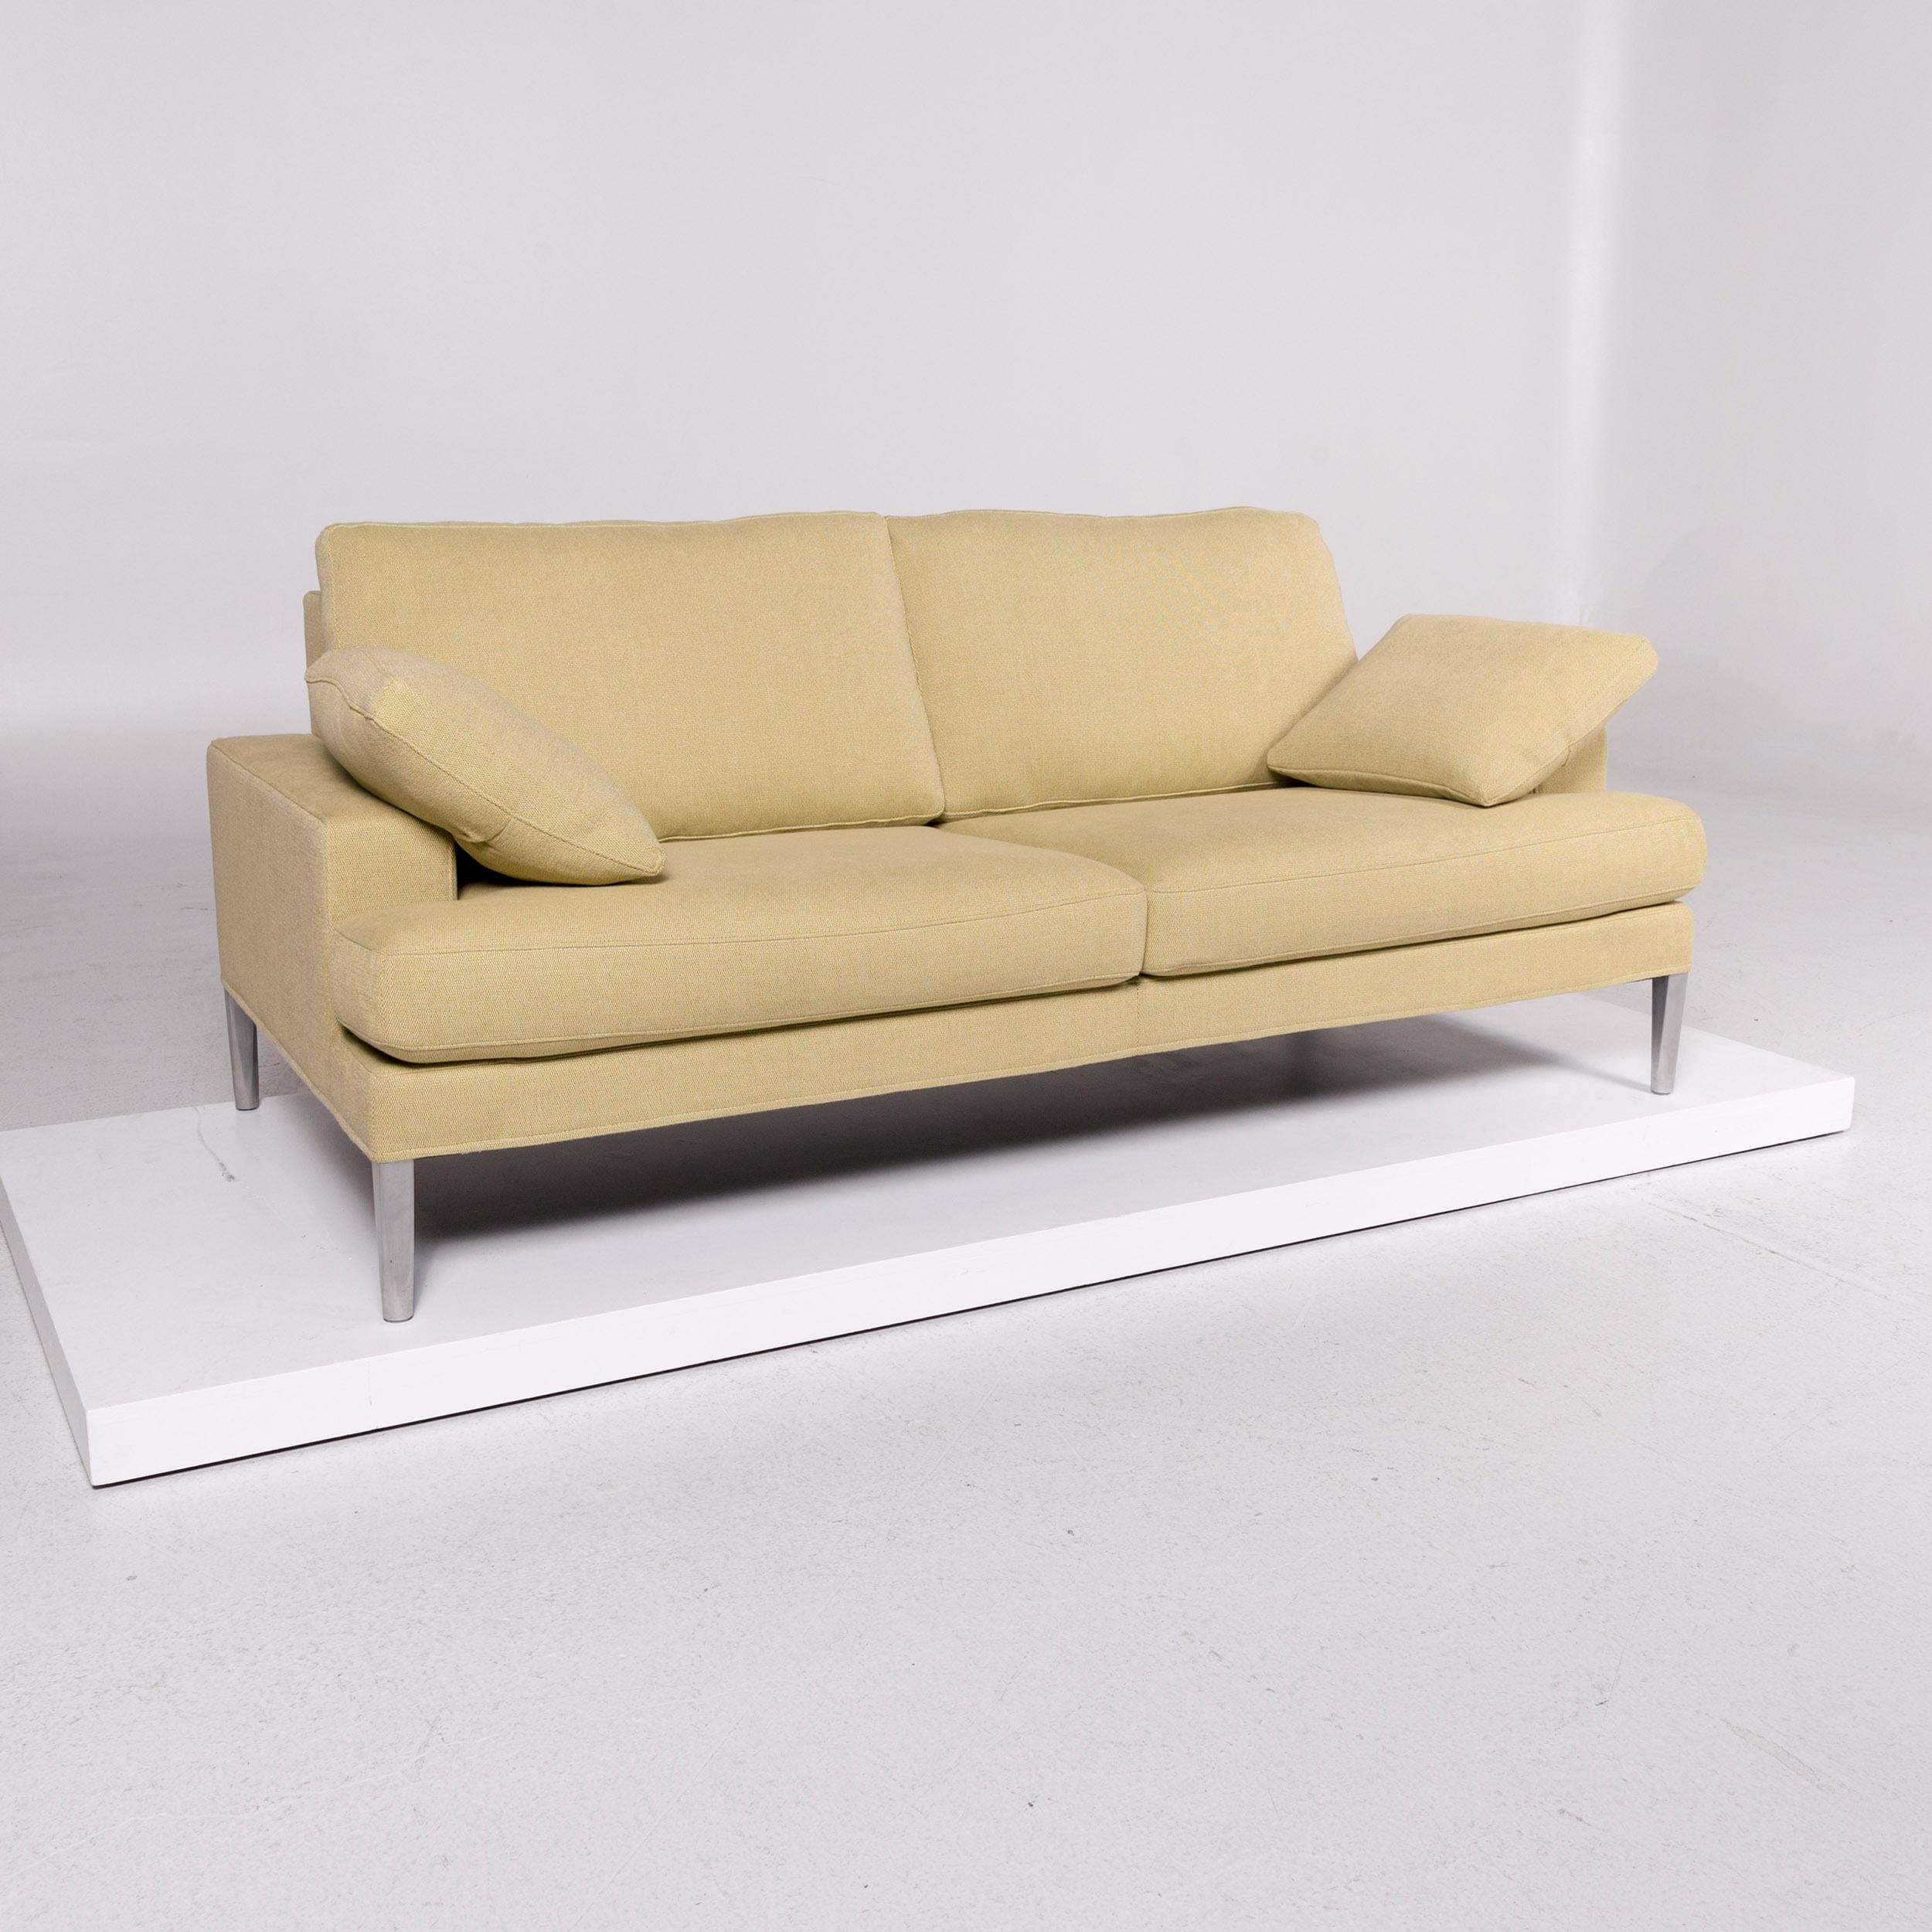 We bring to you a FSM Clarus fabric sofa yellow lemon yellow two-seat couch.
 

 Product measurements in centimeters:
 

Depth 96
Width 190
Height 86
Seat-height 45
Rest-height 53
Seat-depth 52
Seat-width 126
Back-height 30.
 